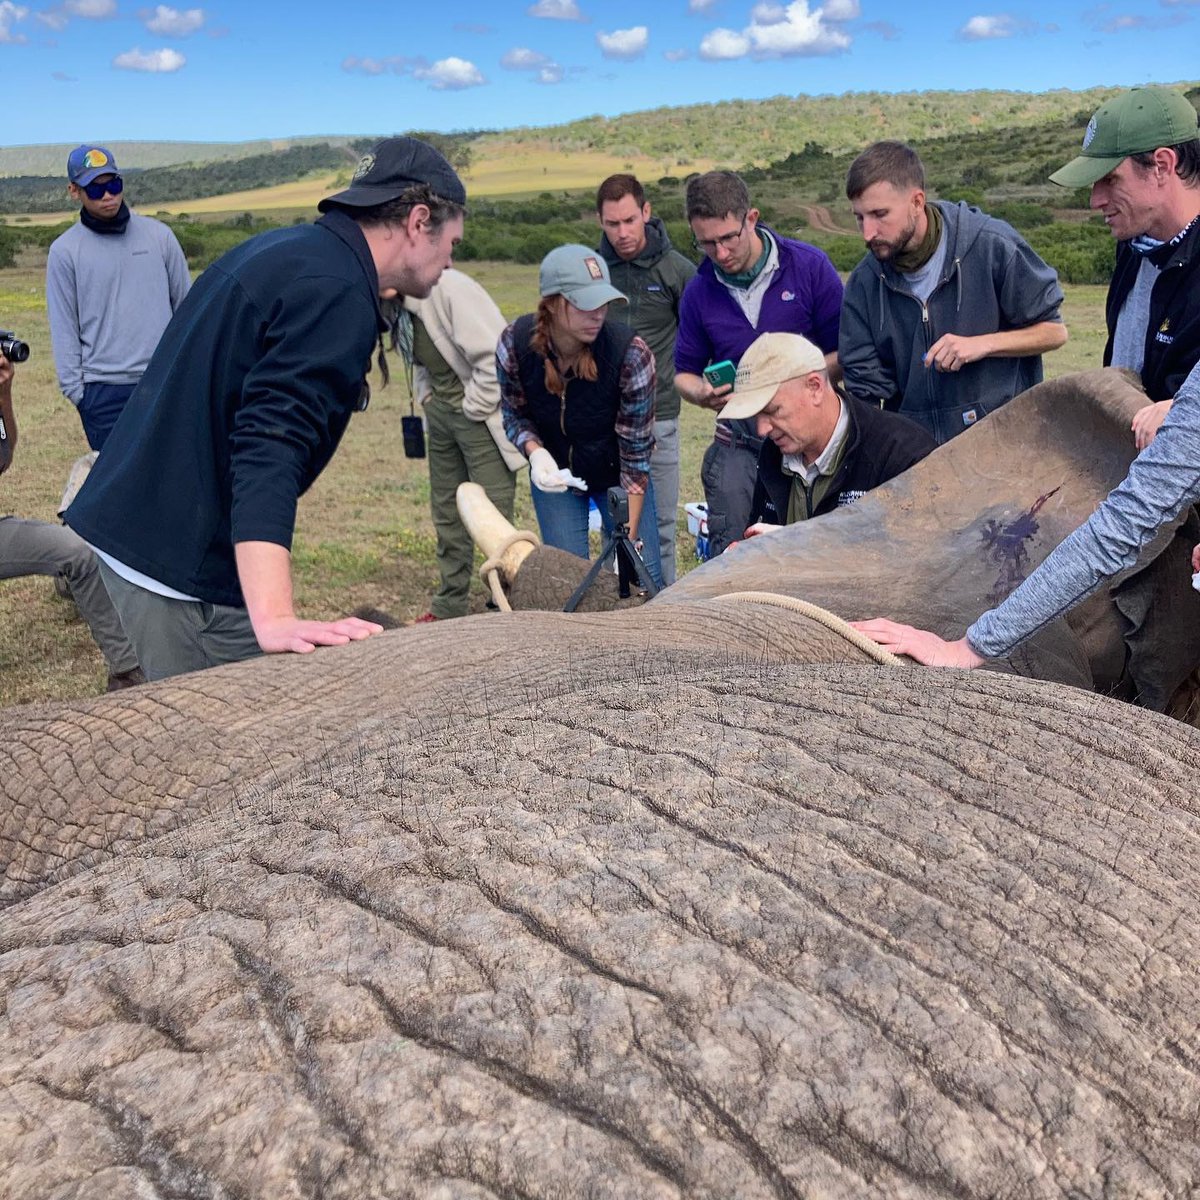 We recently headed out to #SchotiaSafaris to treat an #ElephantBull named Millennium with a suspected cancerous growth on his. Thankfully the results revealed no signs of cancer, and showed the wound was merely a parasitic infection. A happy outcome for this charismatic bull. 🙌